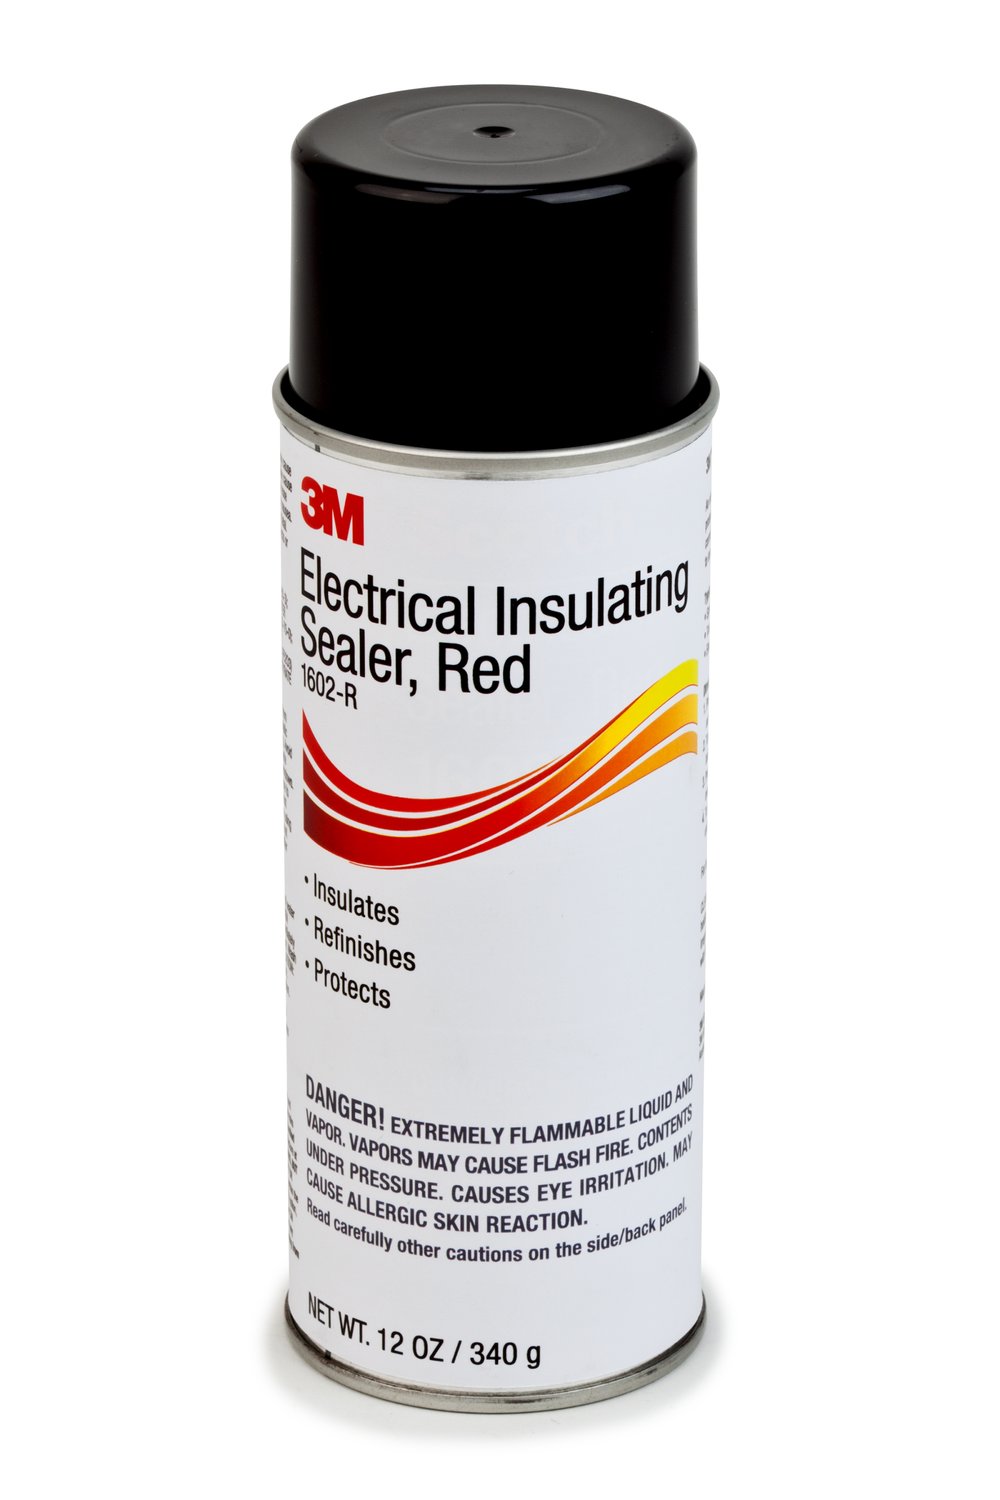 7000006033 - 3M Electrical Insulating Sealer 1602-R, 12-oz Can, Red, 12/Case